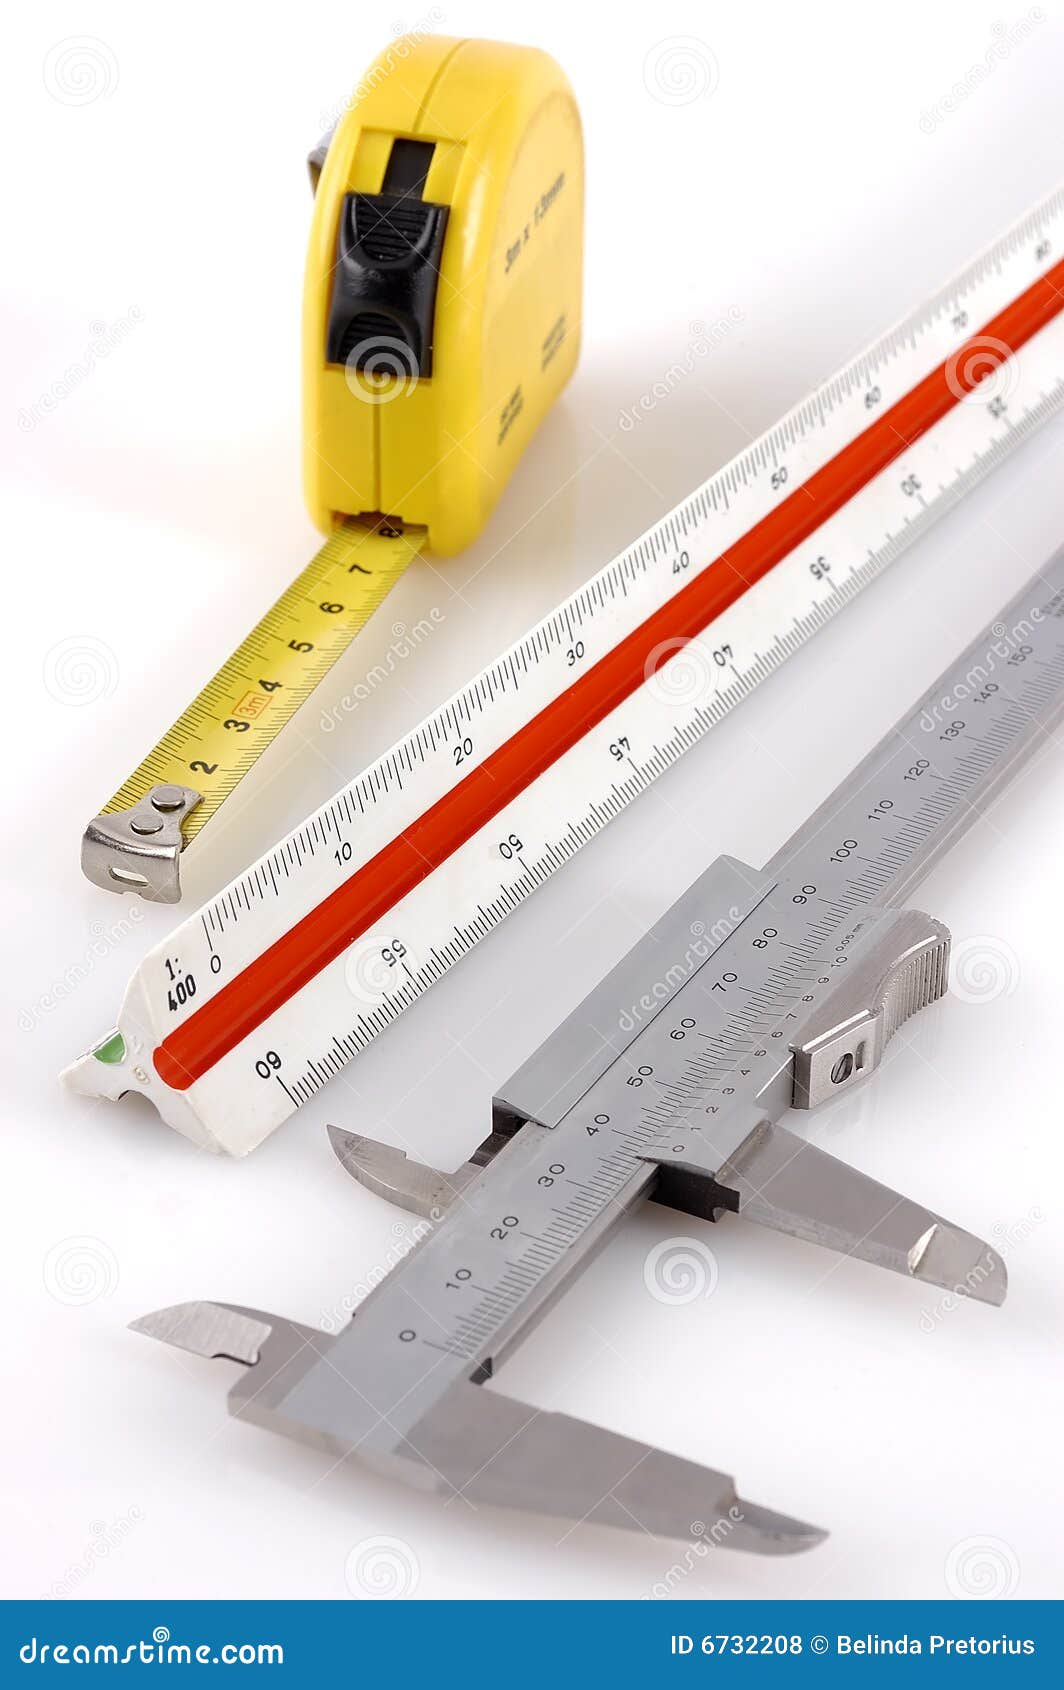  Different Measuring Tools Royalty Free Stock Photos - Image: 6732208